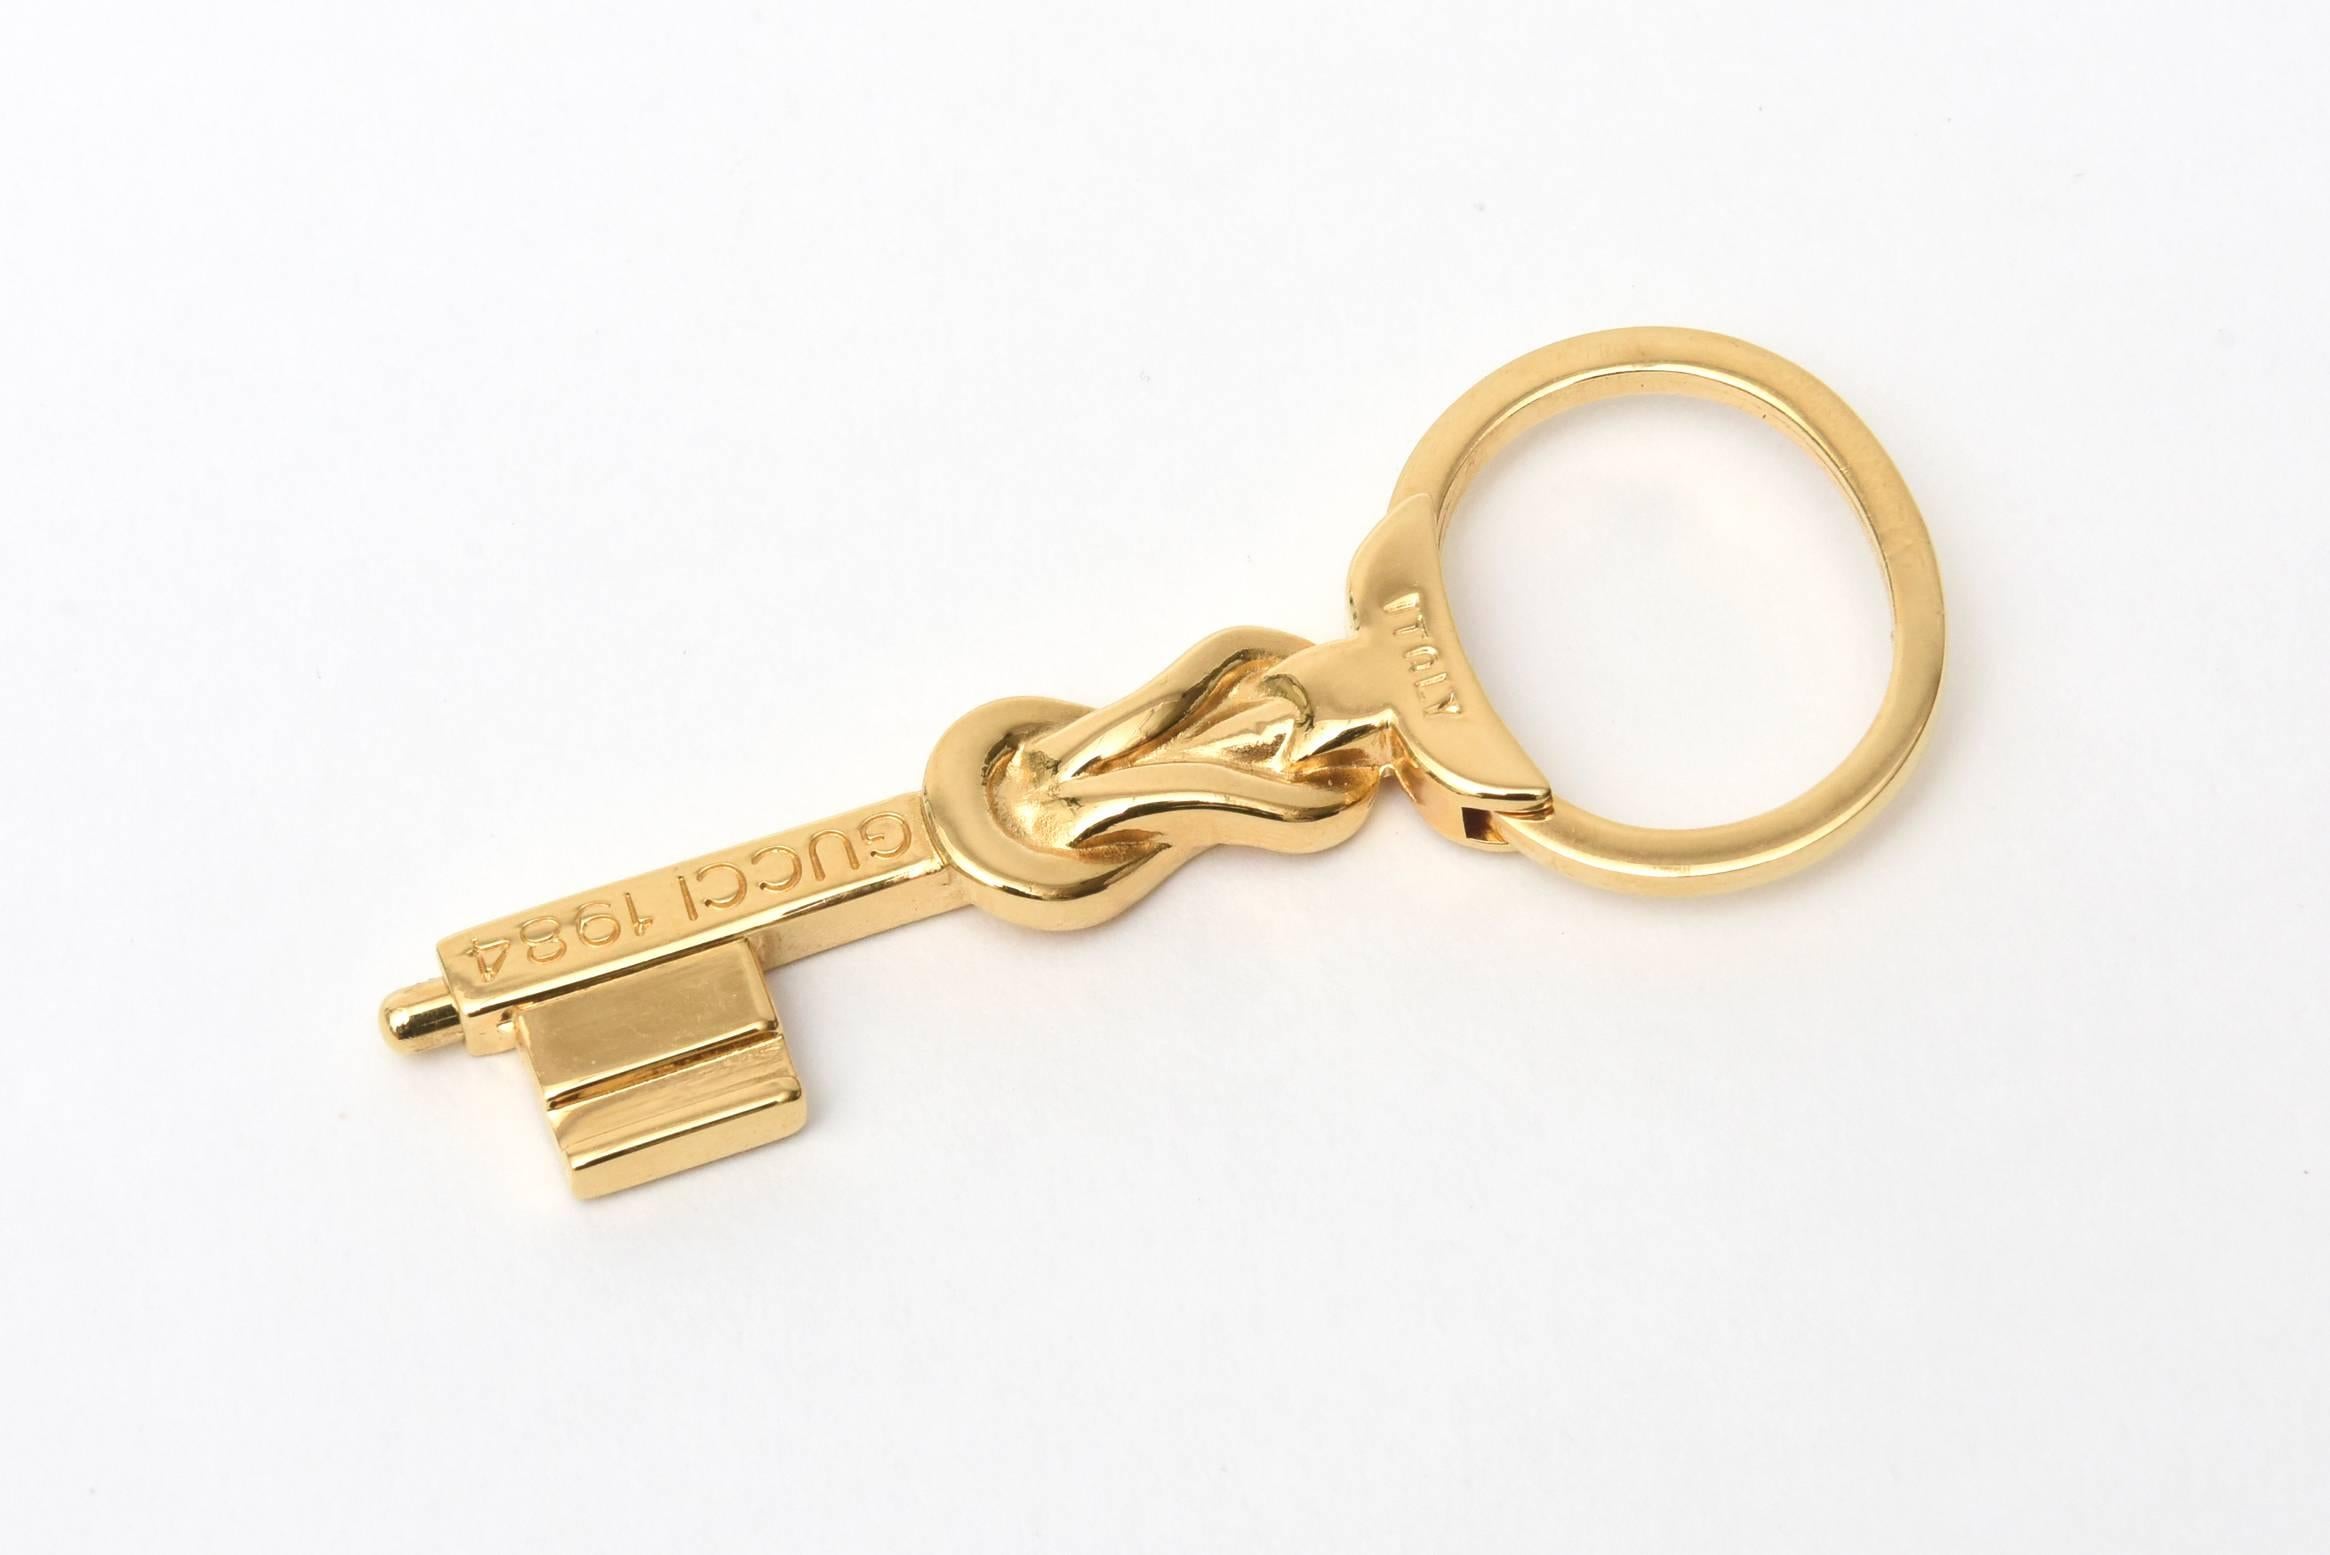 Late 20th Century Signed Italian Gucci Gold-Plated Key Chain